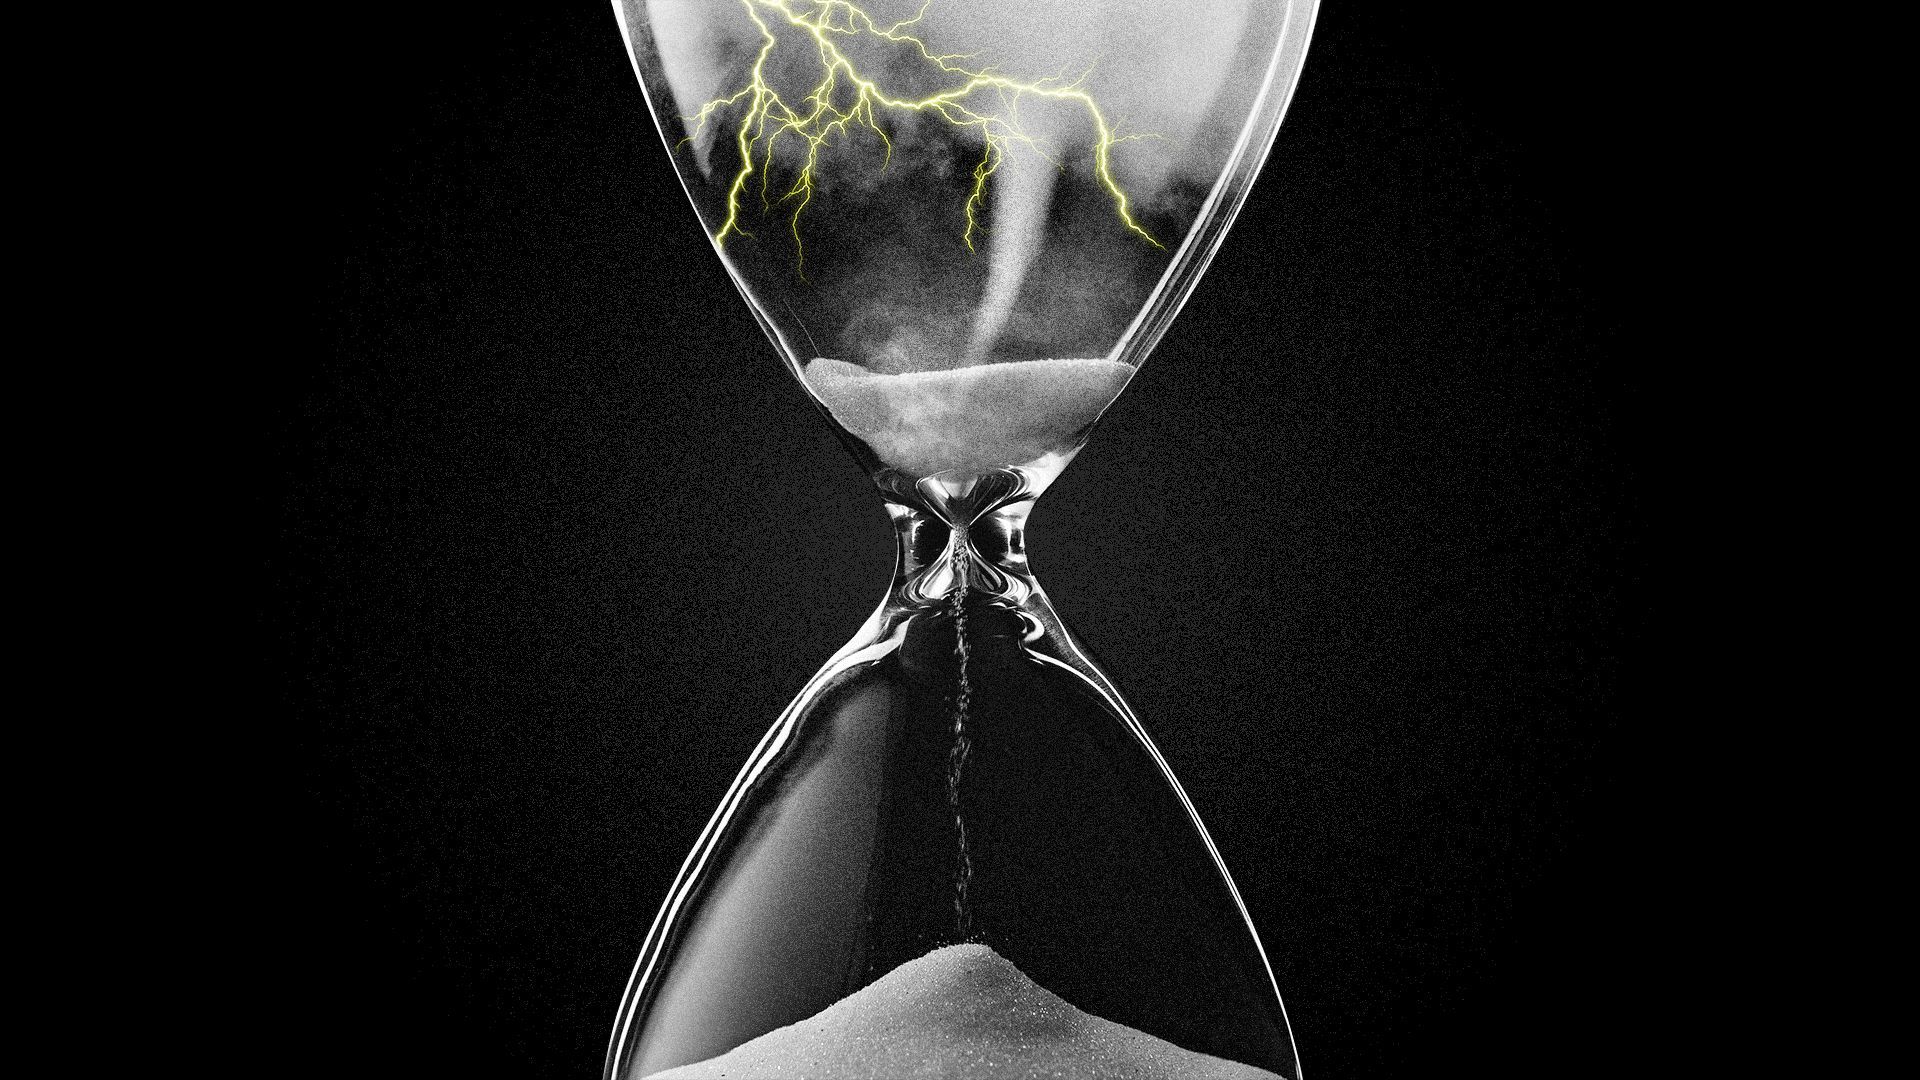 Illustration of an hourglass with a tornado and lightning in the top portion